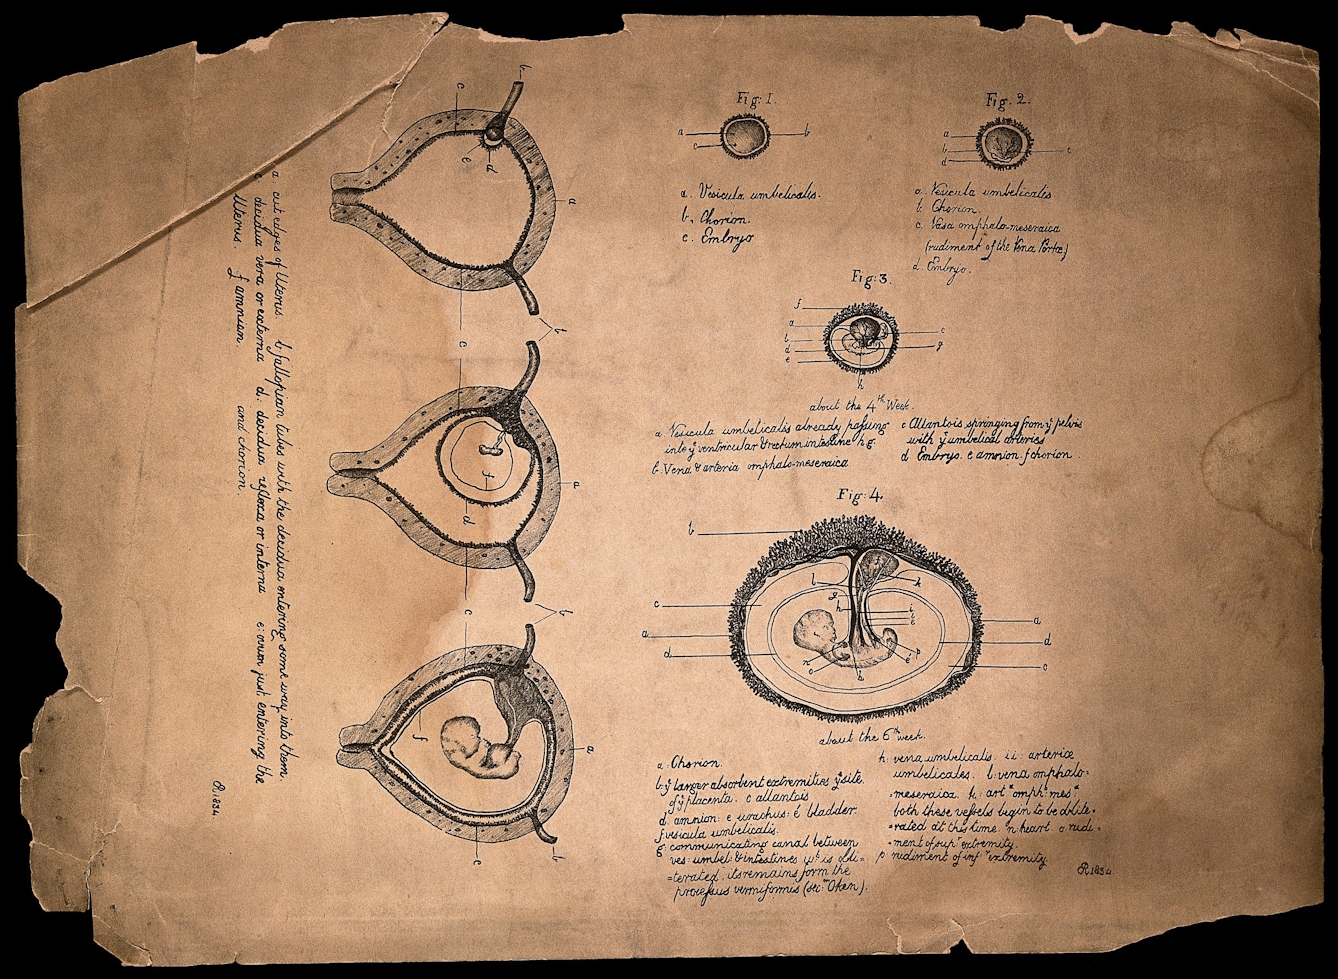 Development of the foetus in the uterus: seven figures, showing the embryo in the early stages of pregnancy. Lithograph by C.R. (?), 1834 (?).